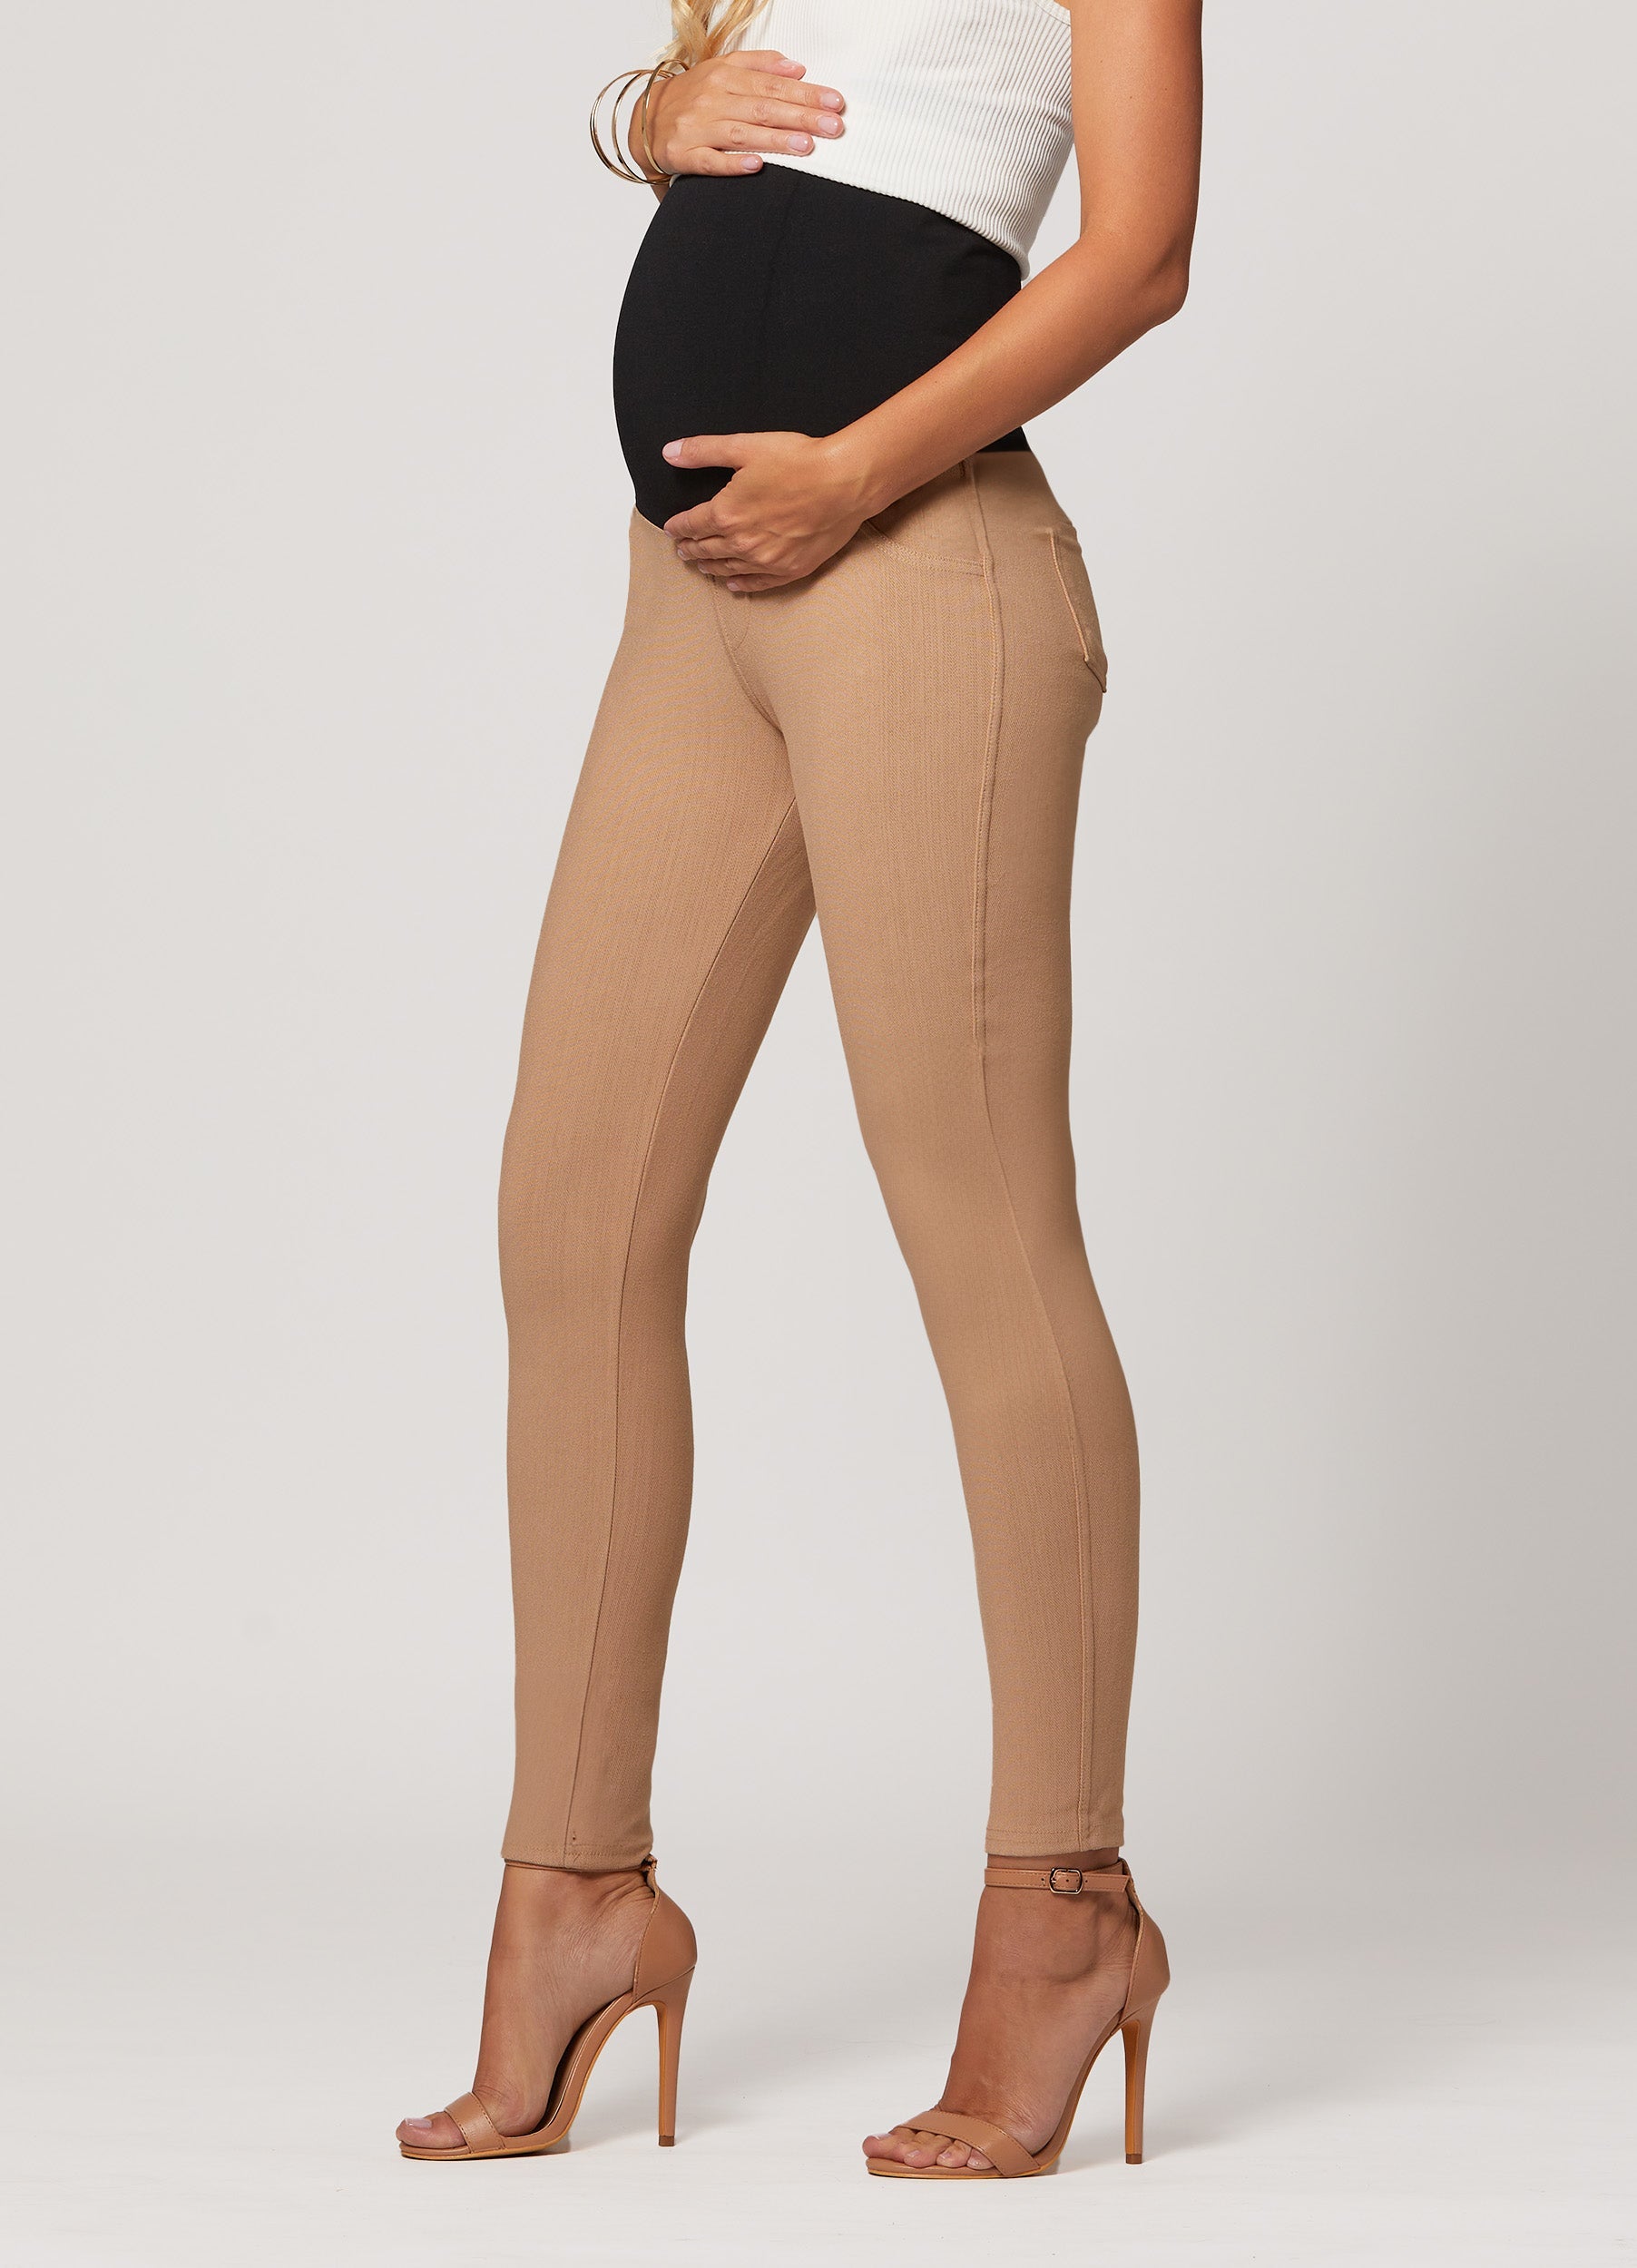 Ava Maternity Premium Stretch Everyday Jeggings - Conceited Co.